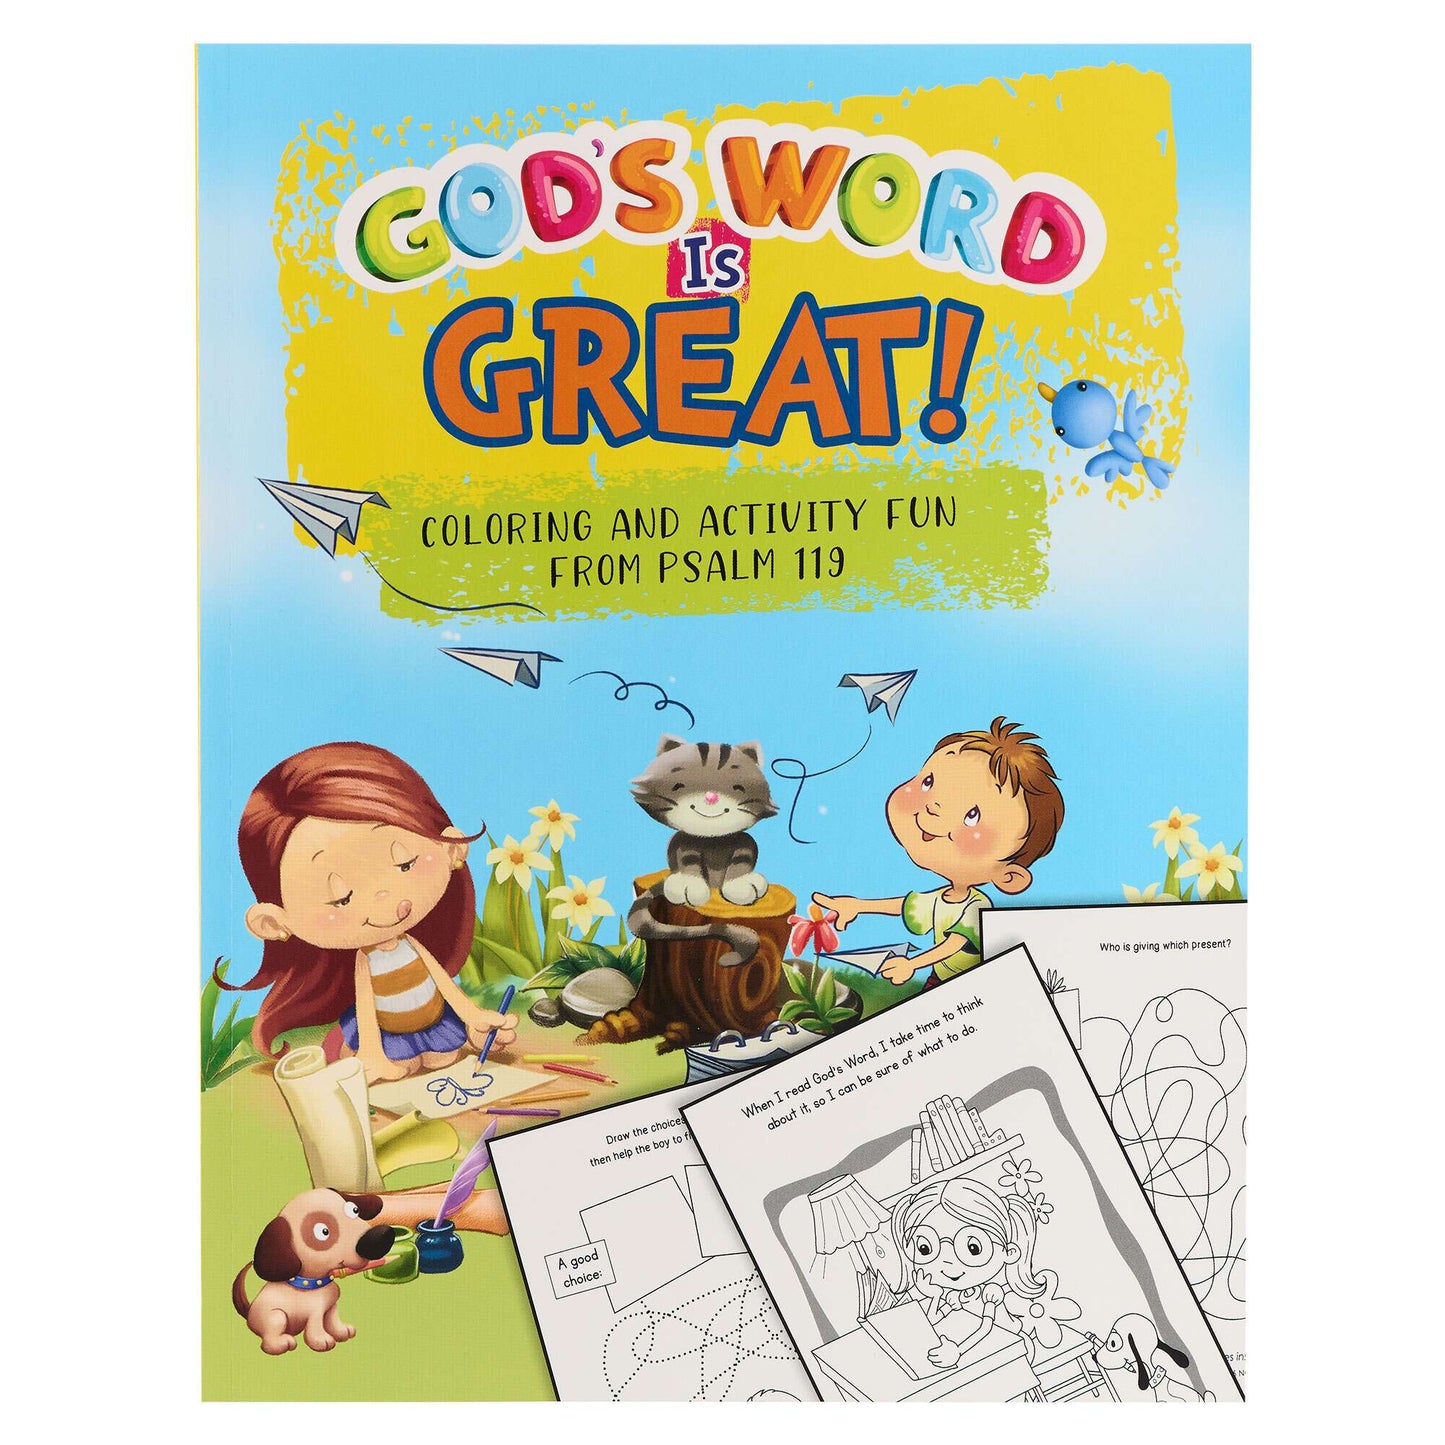 God's Word is Great Coloring and Activity Book